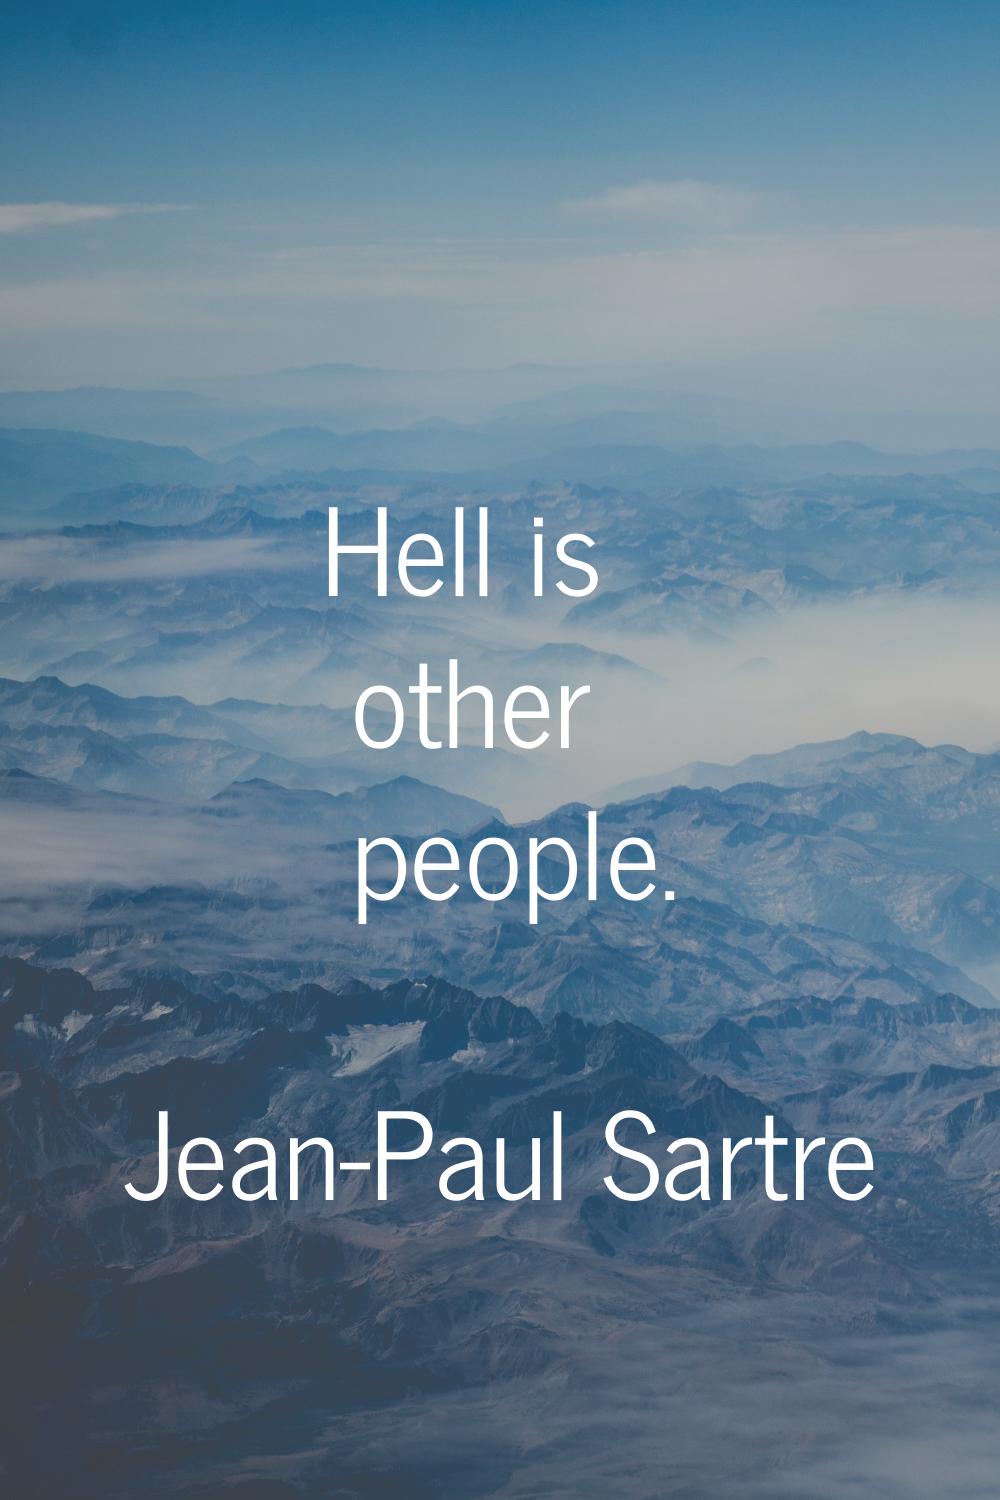 Hell is other people.